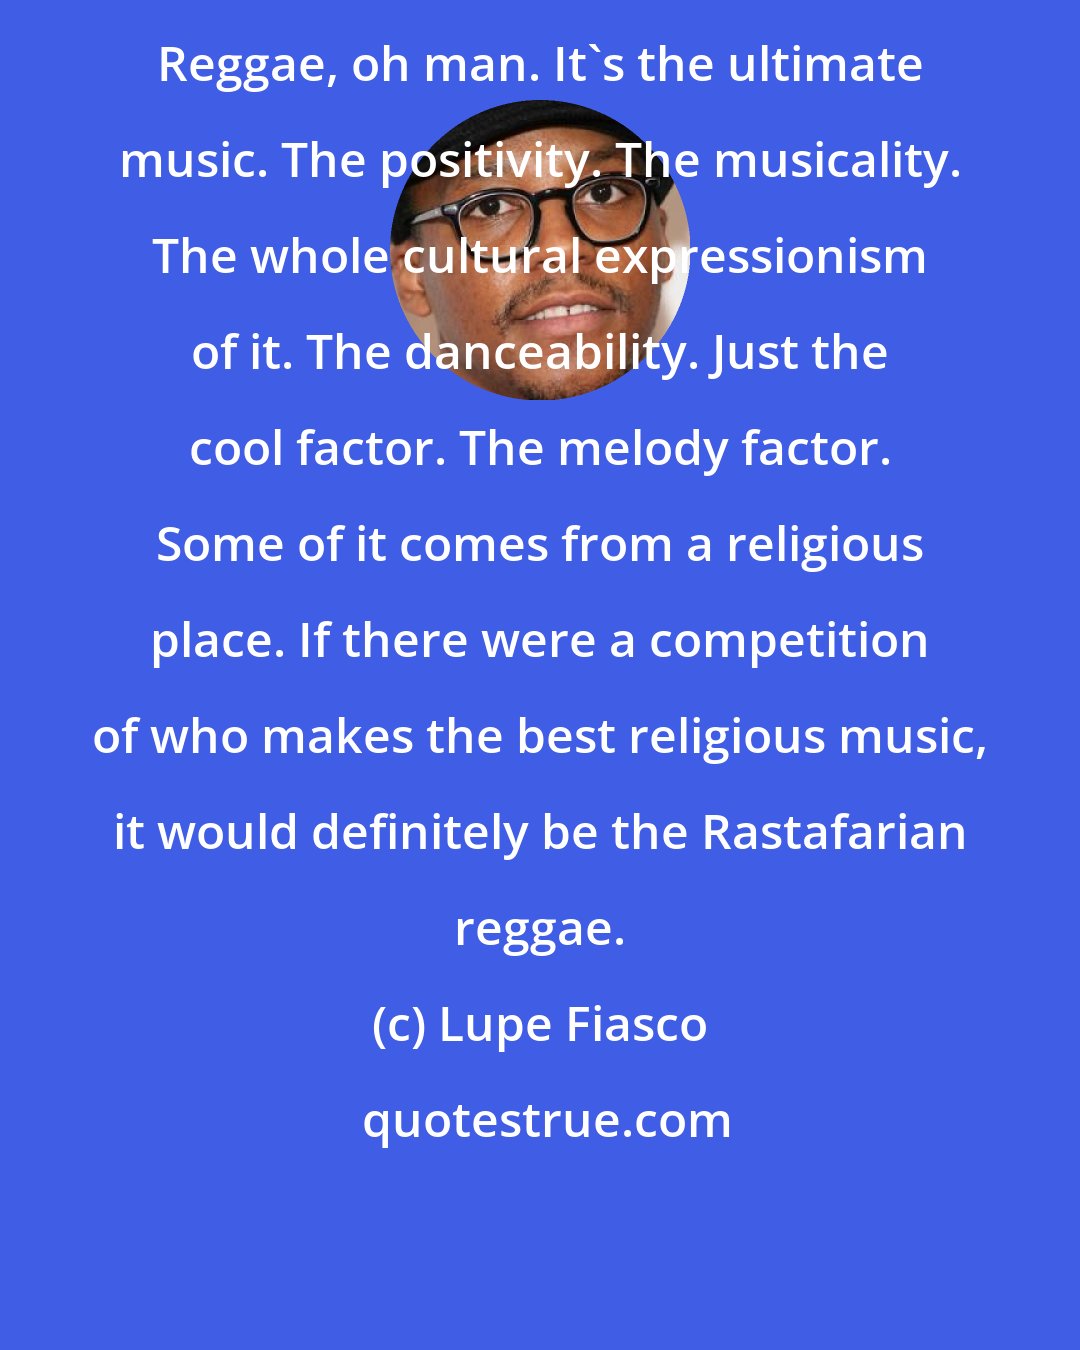 Lupe Fiasco: Reggae, oh man. It's the ultimate music. The positivity. The musicality. The whole cultural expressionism of it. The danceability. Just the cool factor. The melody factor. Some of it comes from a religious place. If there were a competition of who makes the best religious music, it would definitely be the Rastafarian reggae.